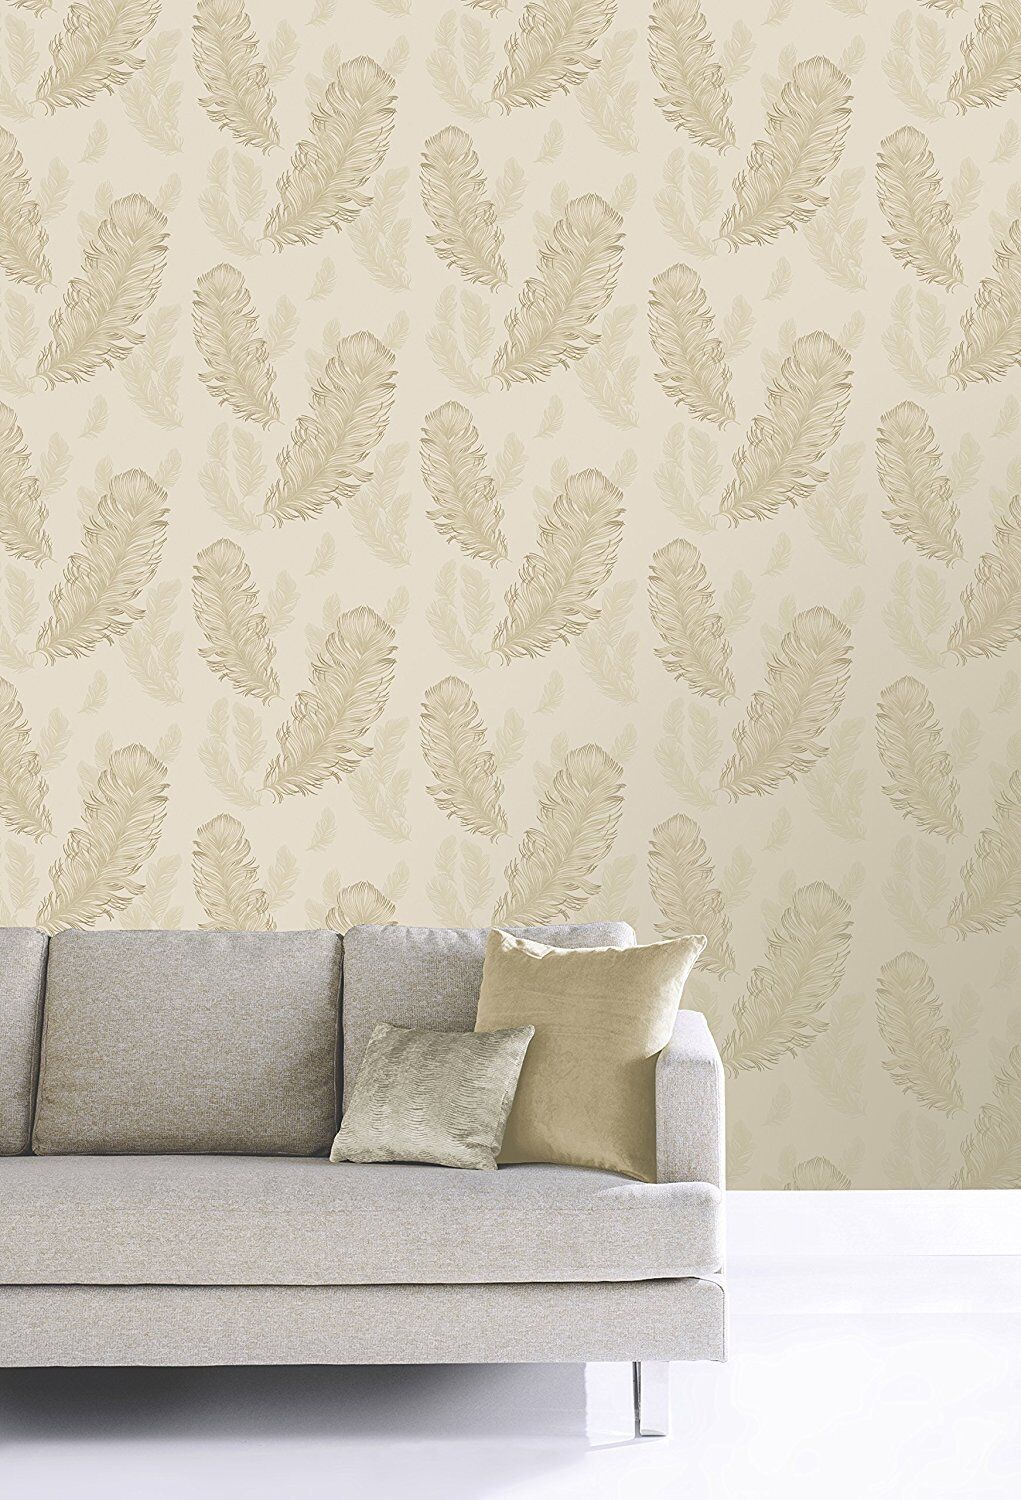 Arthouse Sirius Feather Glitter Wallpaper in Gold - 673601 | eBay